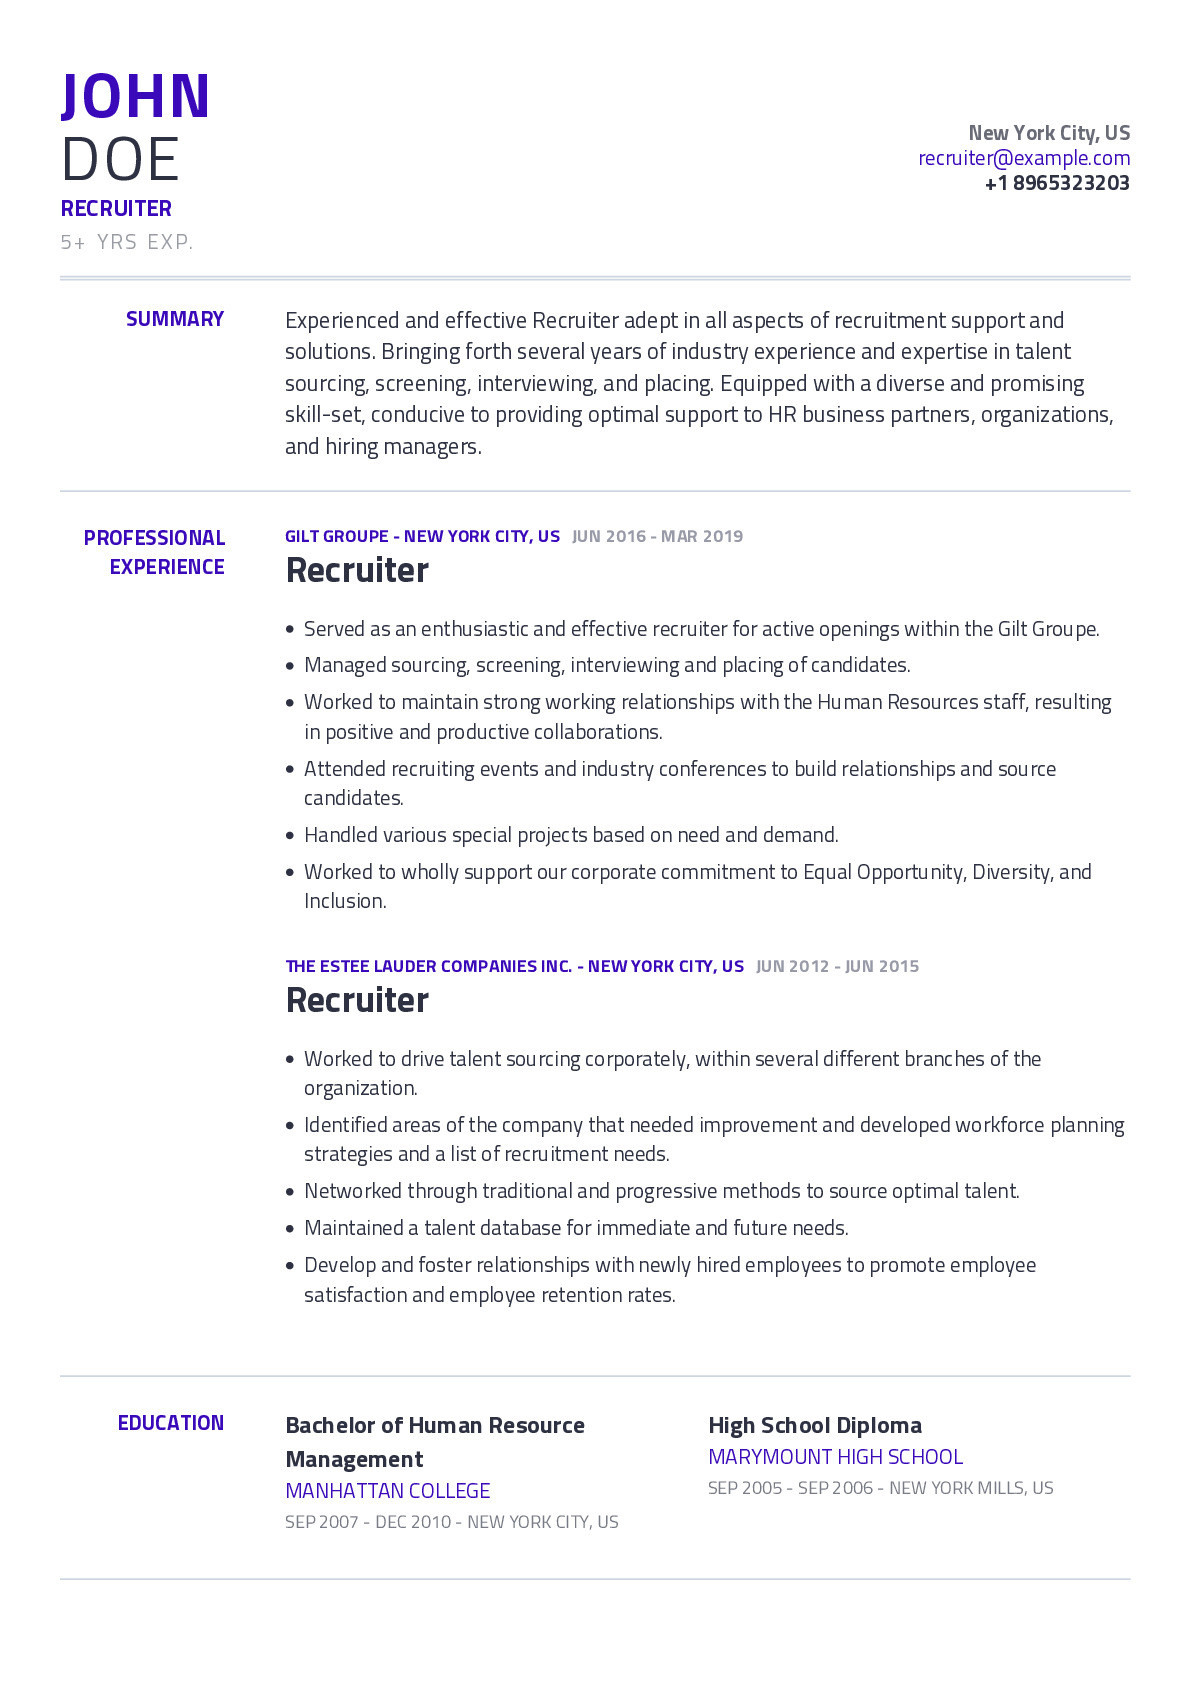 Sample Resume for It Recruiter Position Recruiter Resume Example with Content Sample Craftmycv